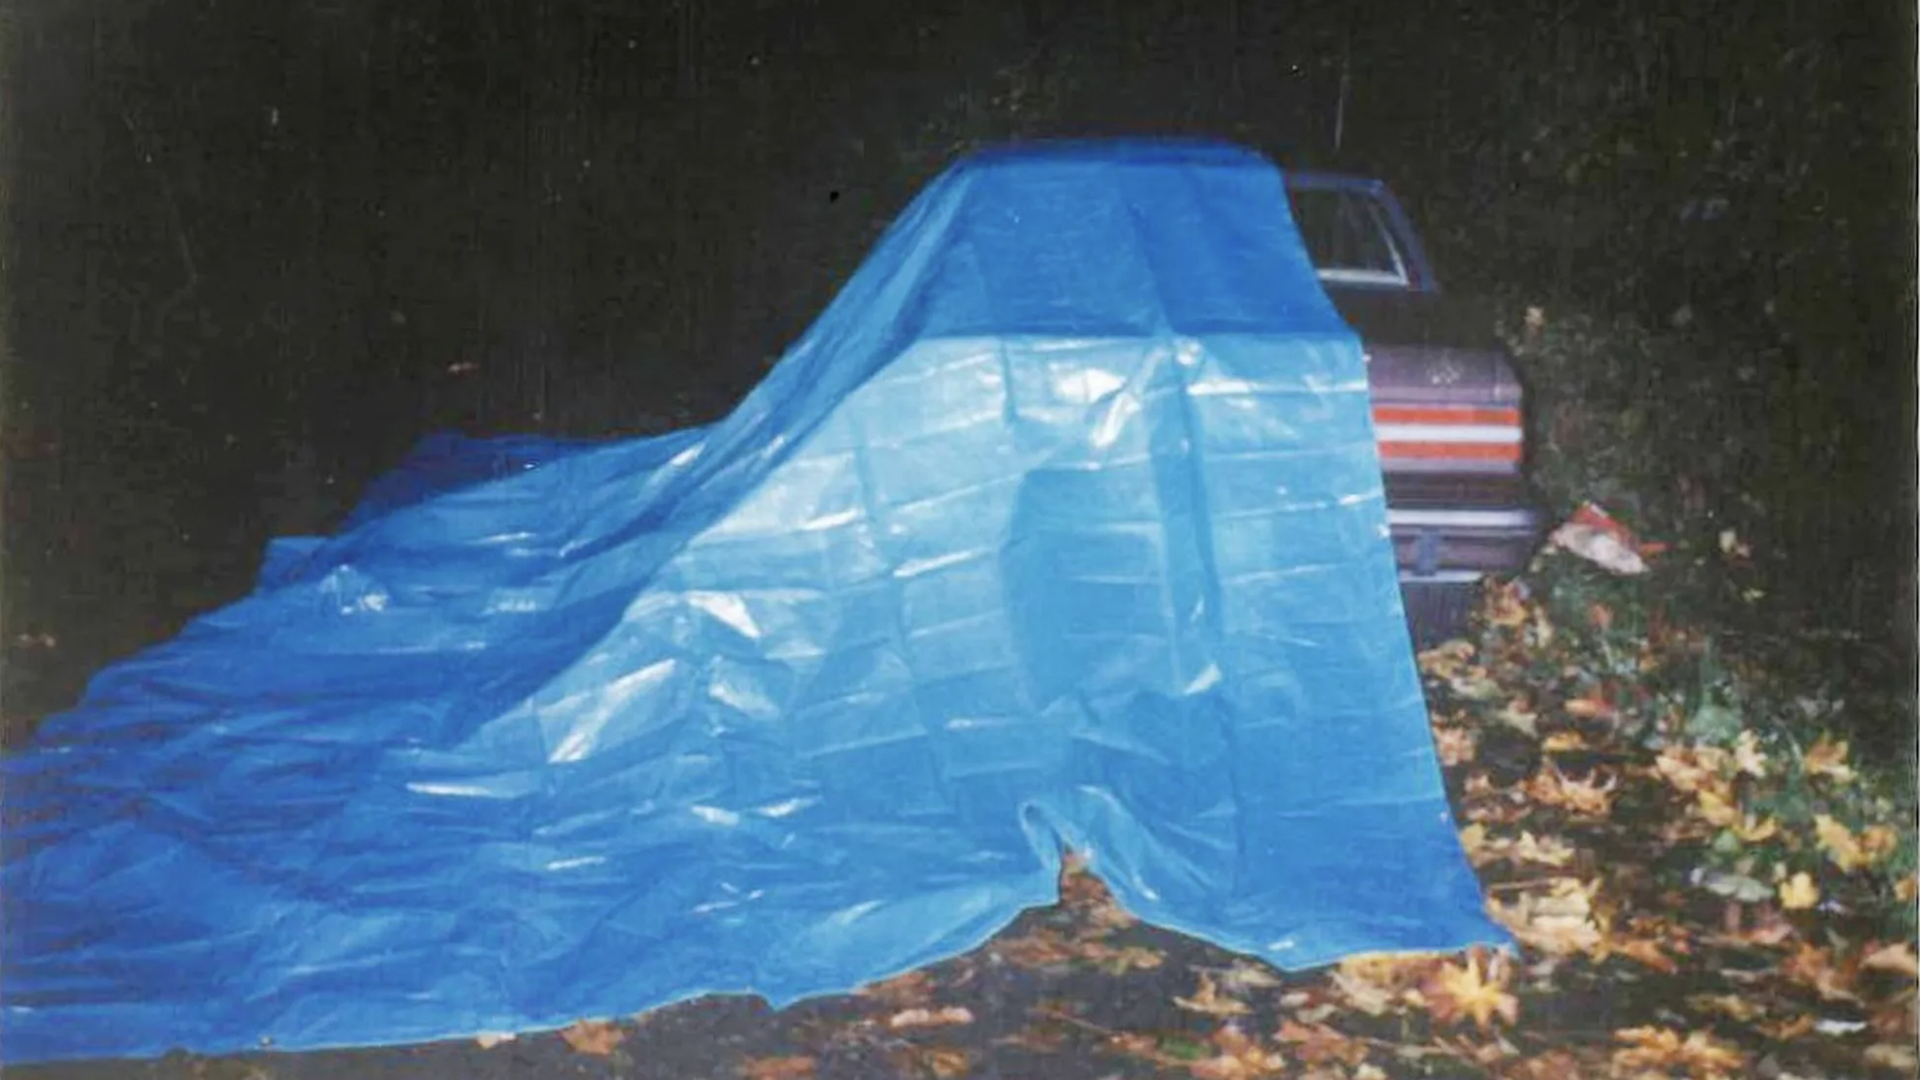 A photo of an older model car with one side draped with a blue tarp.